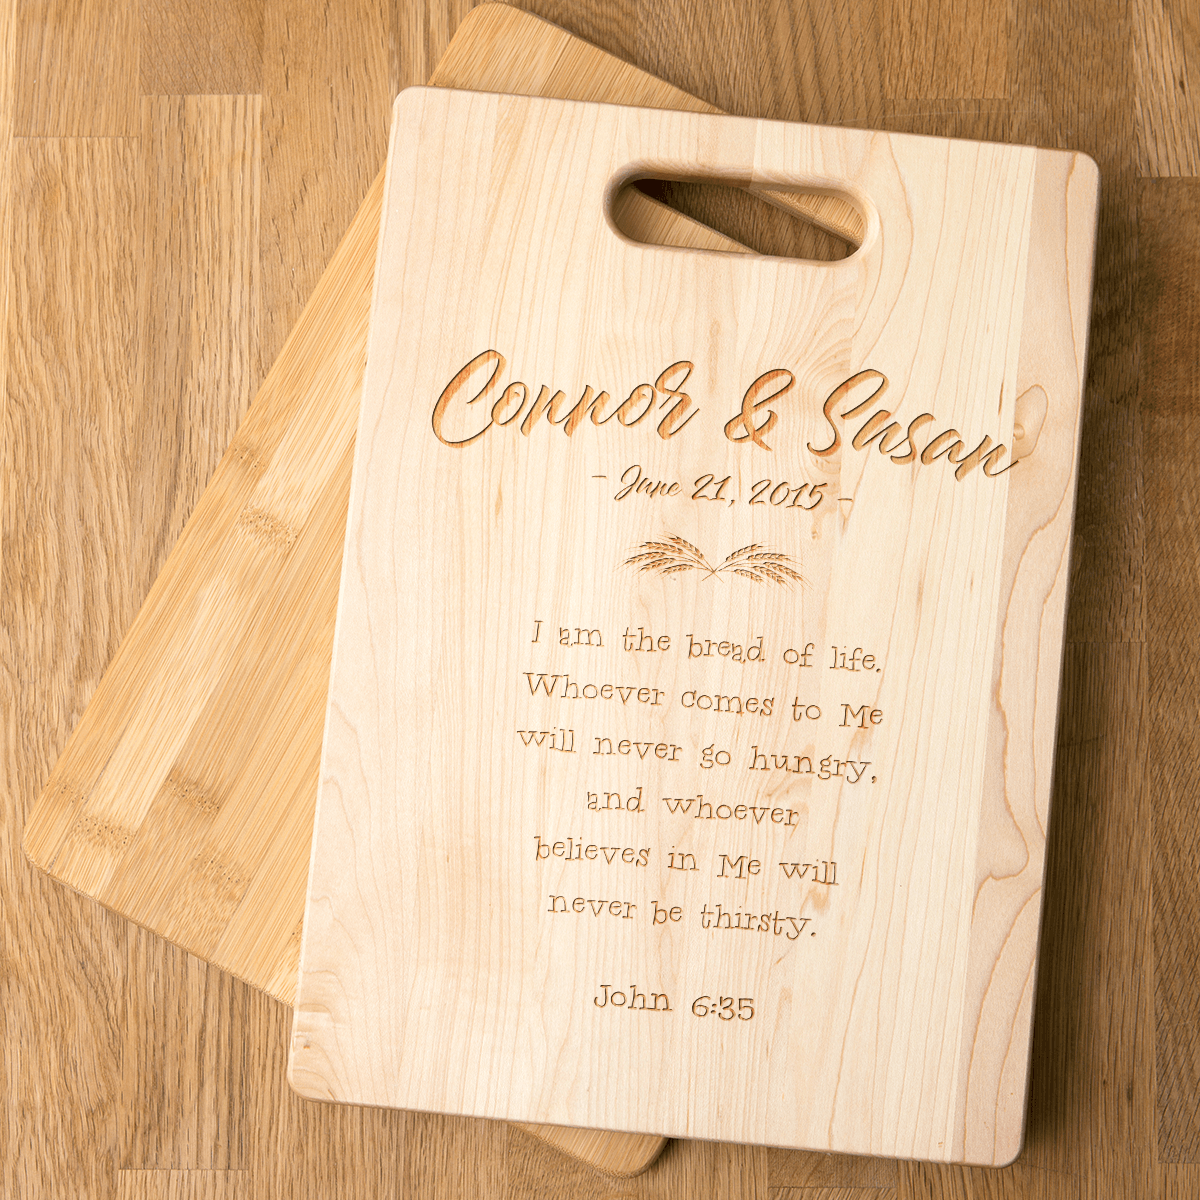 Bread of Life Christian Couples Personalized Wooden Cutting Board